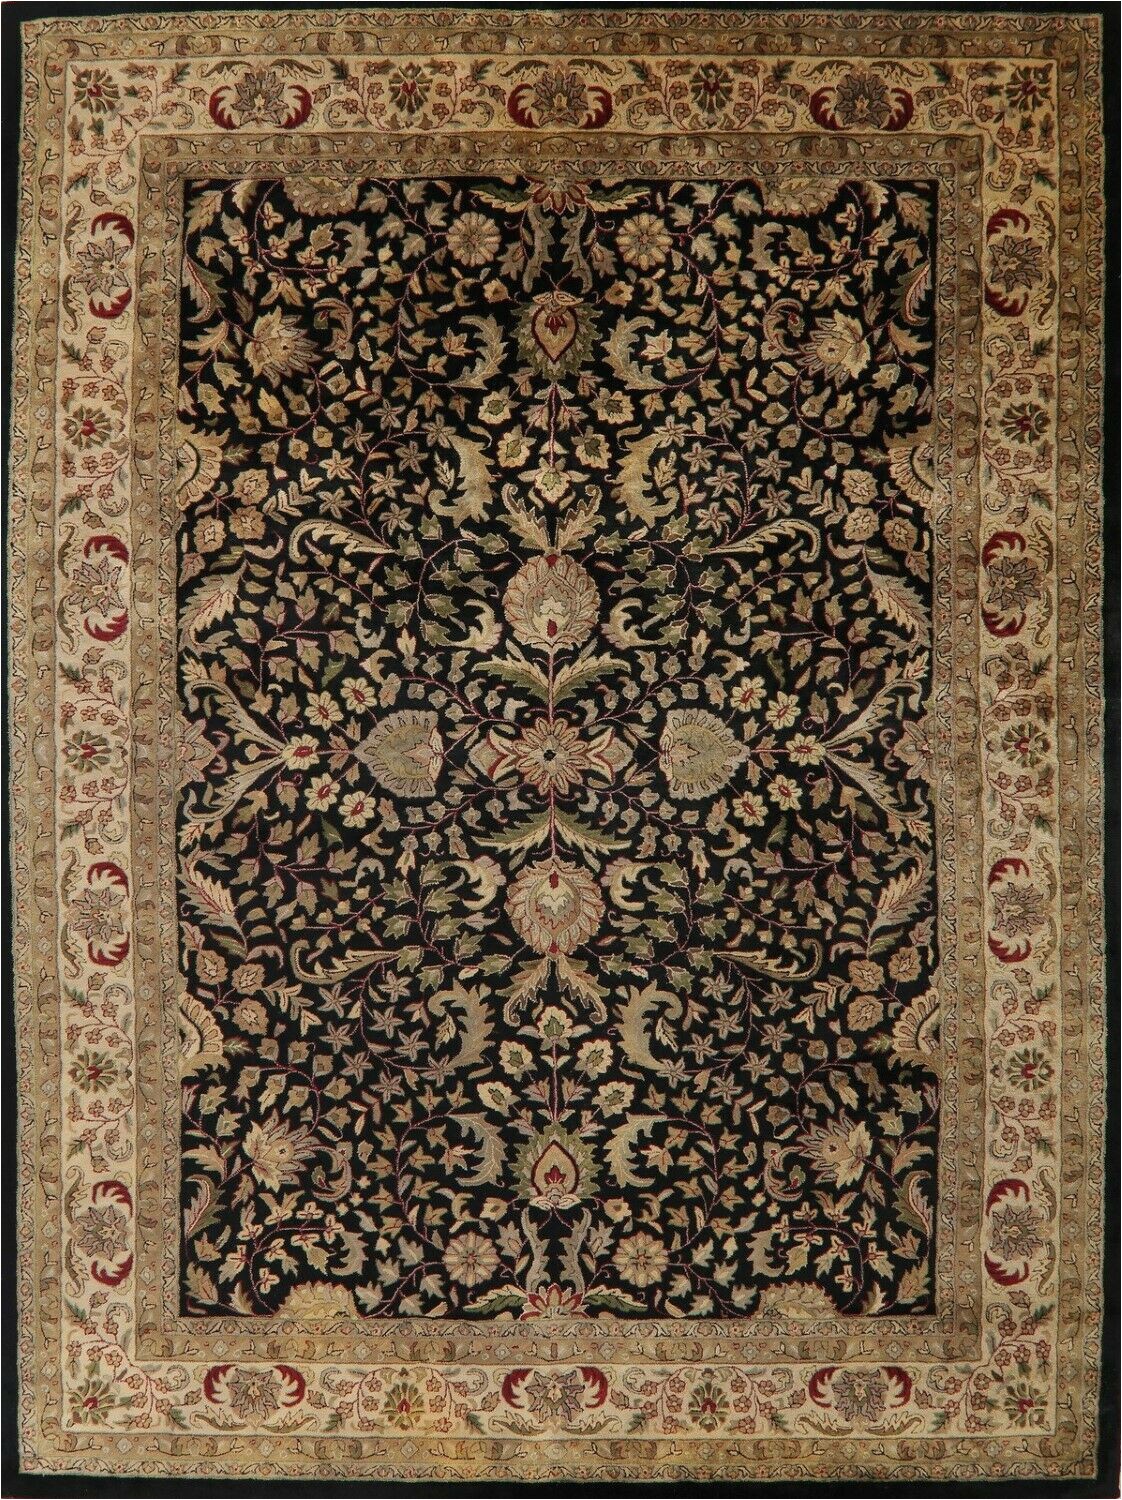 French Country Wool area Rugs assorted Allover Floral Black Beige Agra oriental area Rug Hand Tufted Wool 9×12